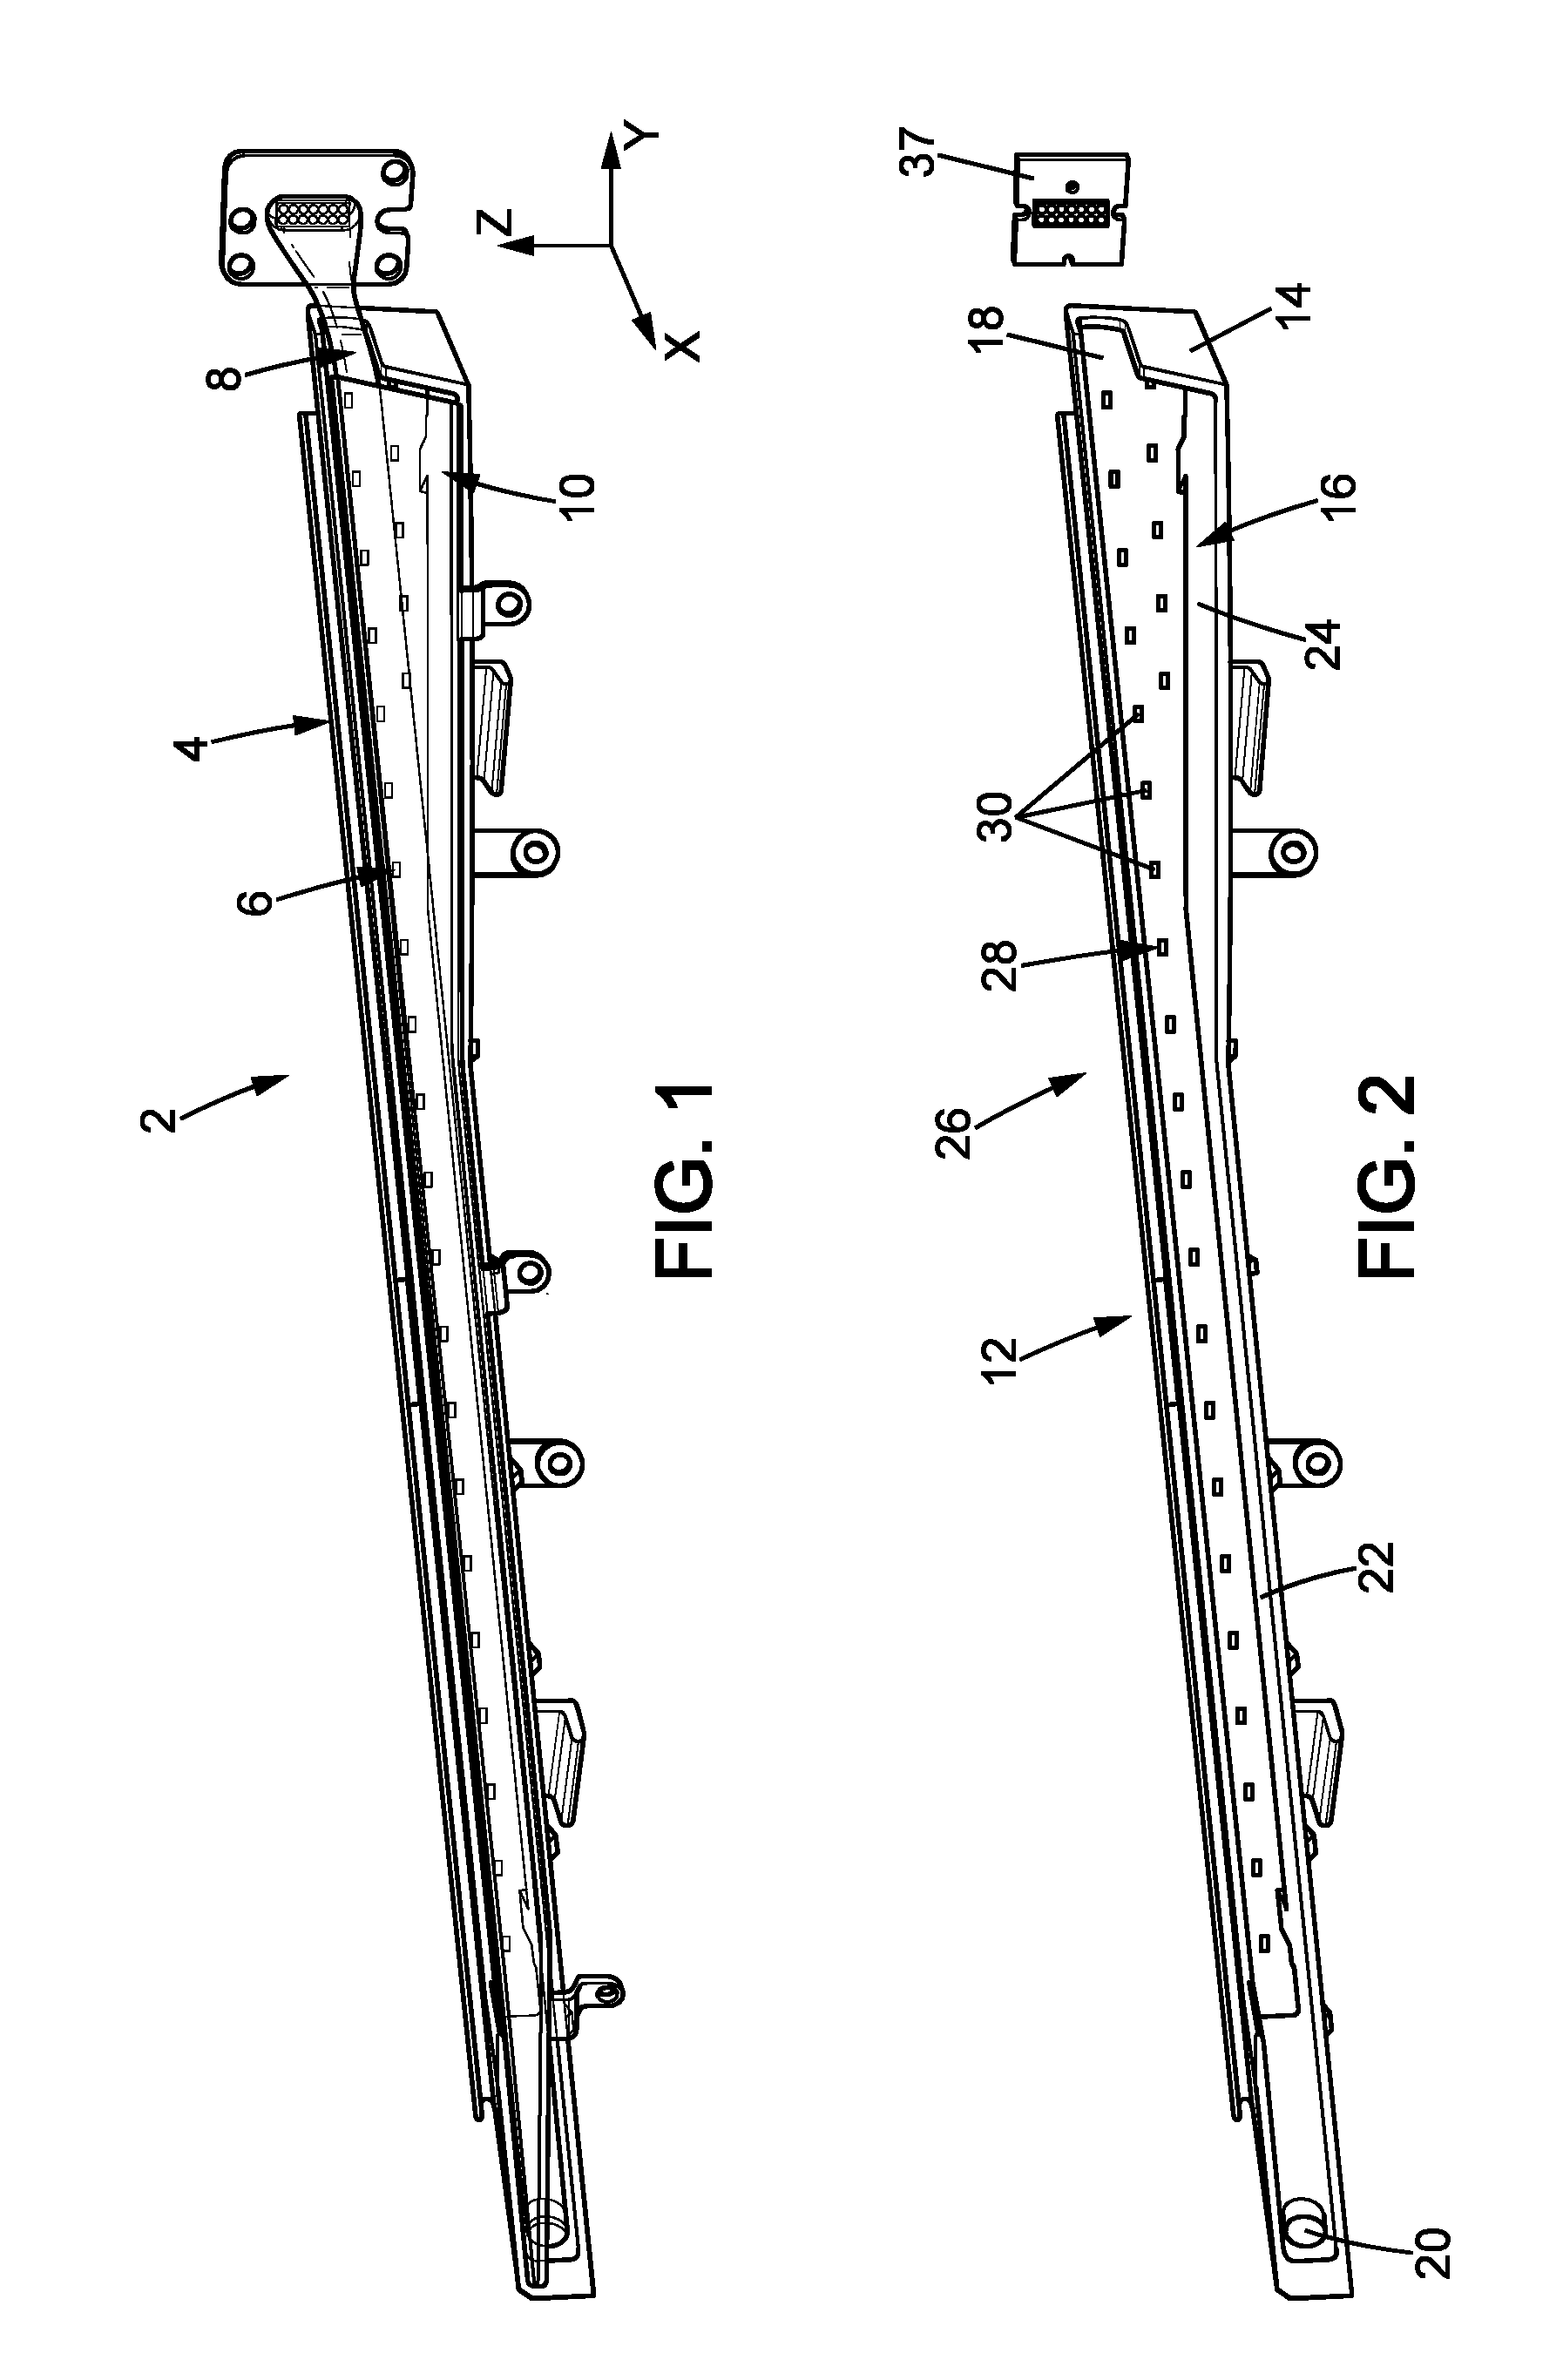 Optical system for a motor vehicle